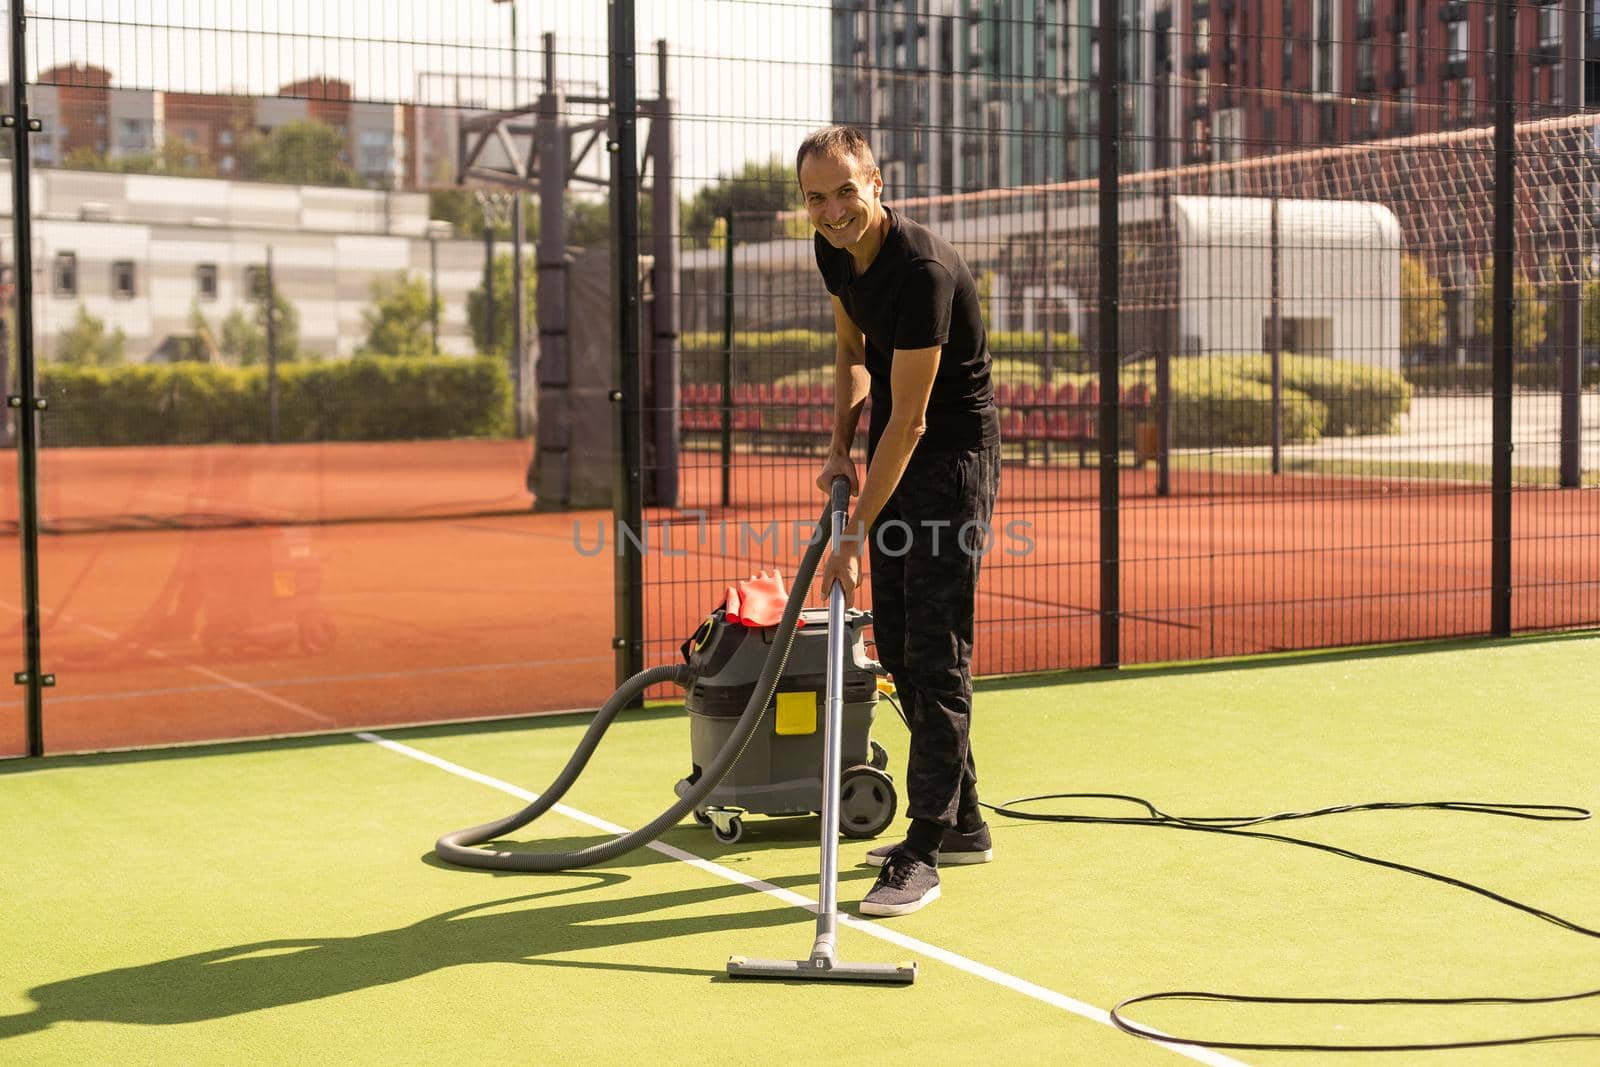 The boy cleaning tennis court clay surface after the match to prepare for the next match.